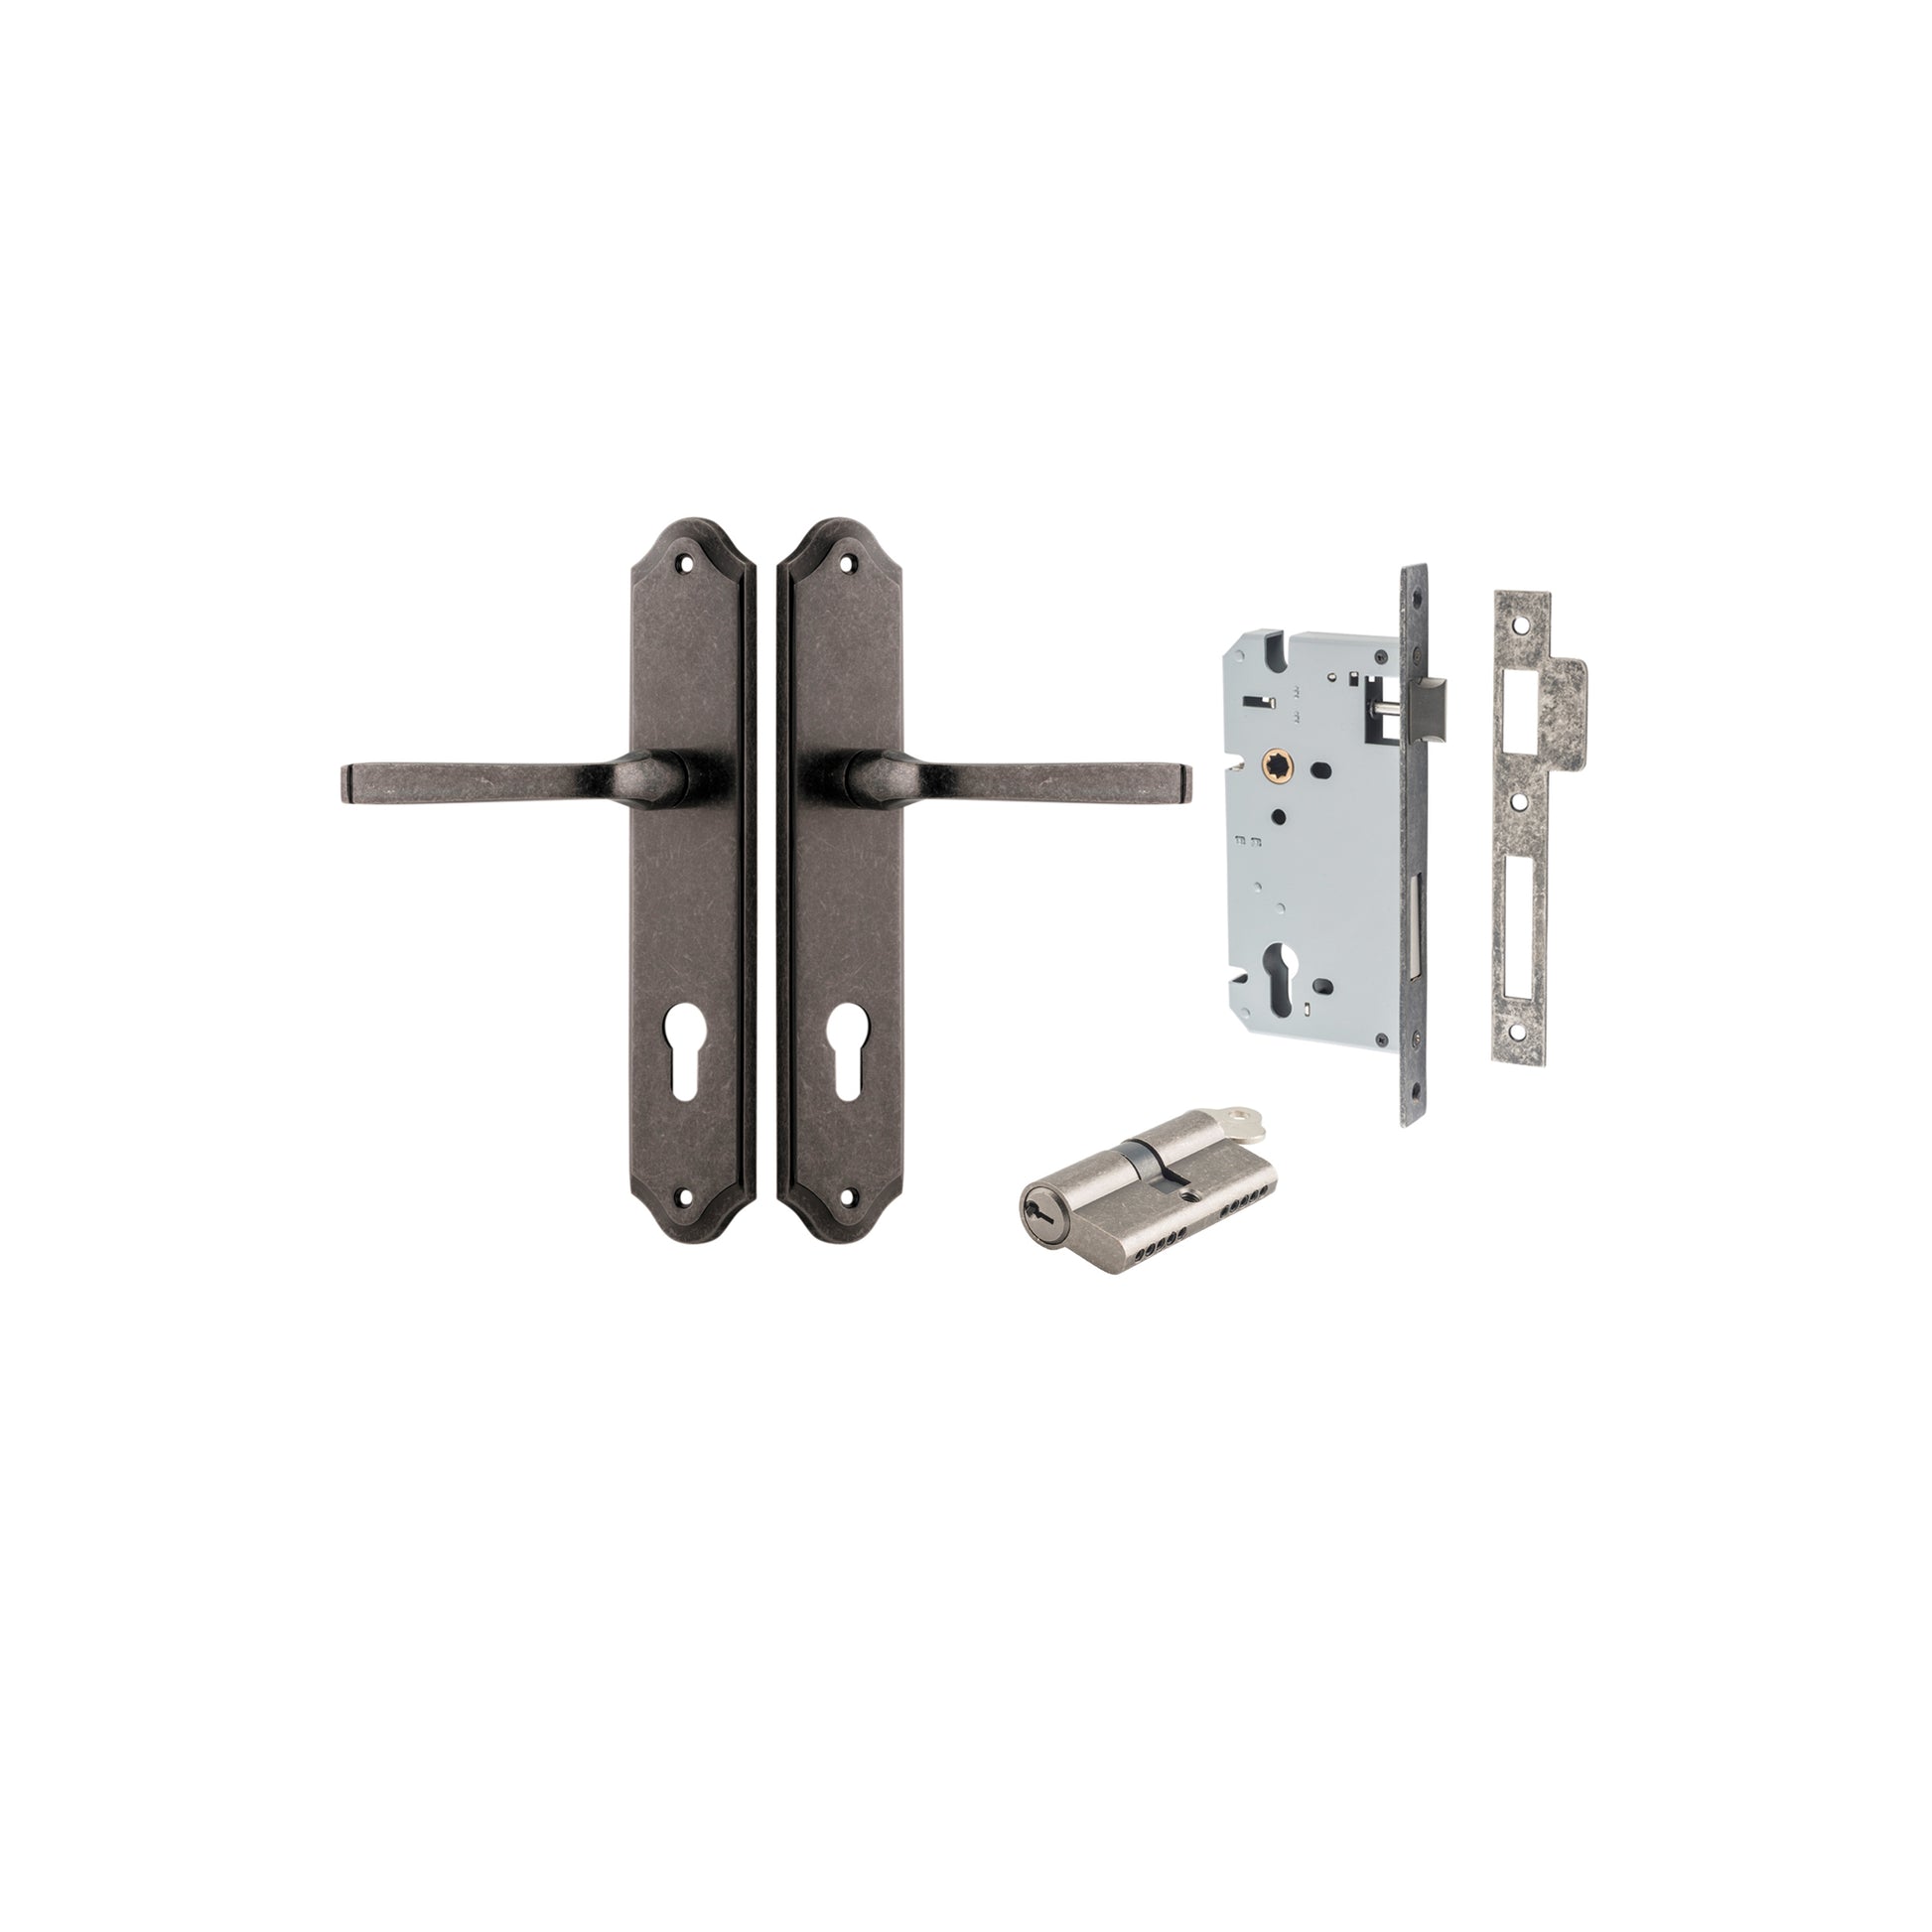 Door Lever Annecy Shouldered Euro Distressed Nickel CTC85mm H240xW50xP65mm Entrance Kit, Mortice Lock Euro Distressed Nickel CTC85mm Backset 60mm, Euro Cylinder Dual Function 5 Pin Distressed Nickel L65mm KA1 in Distressed Nickel